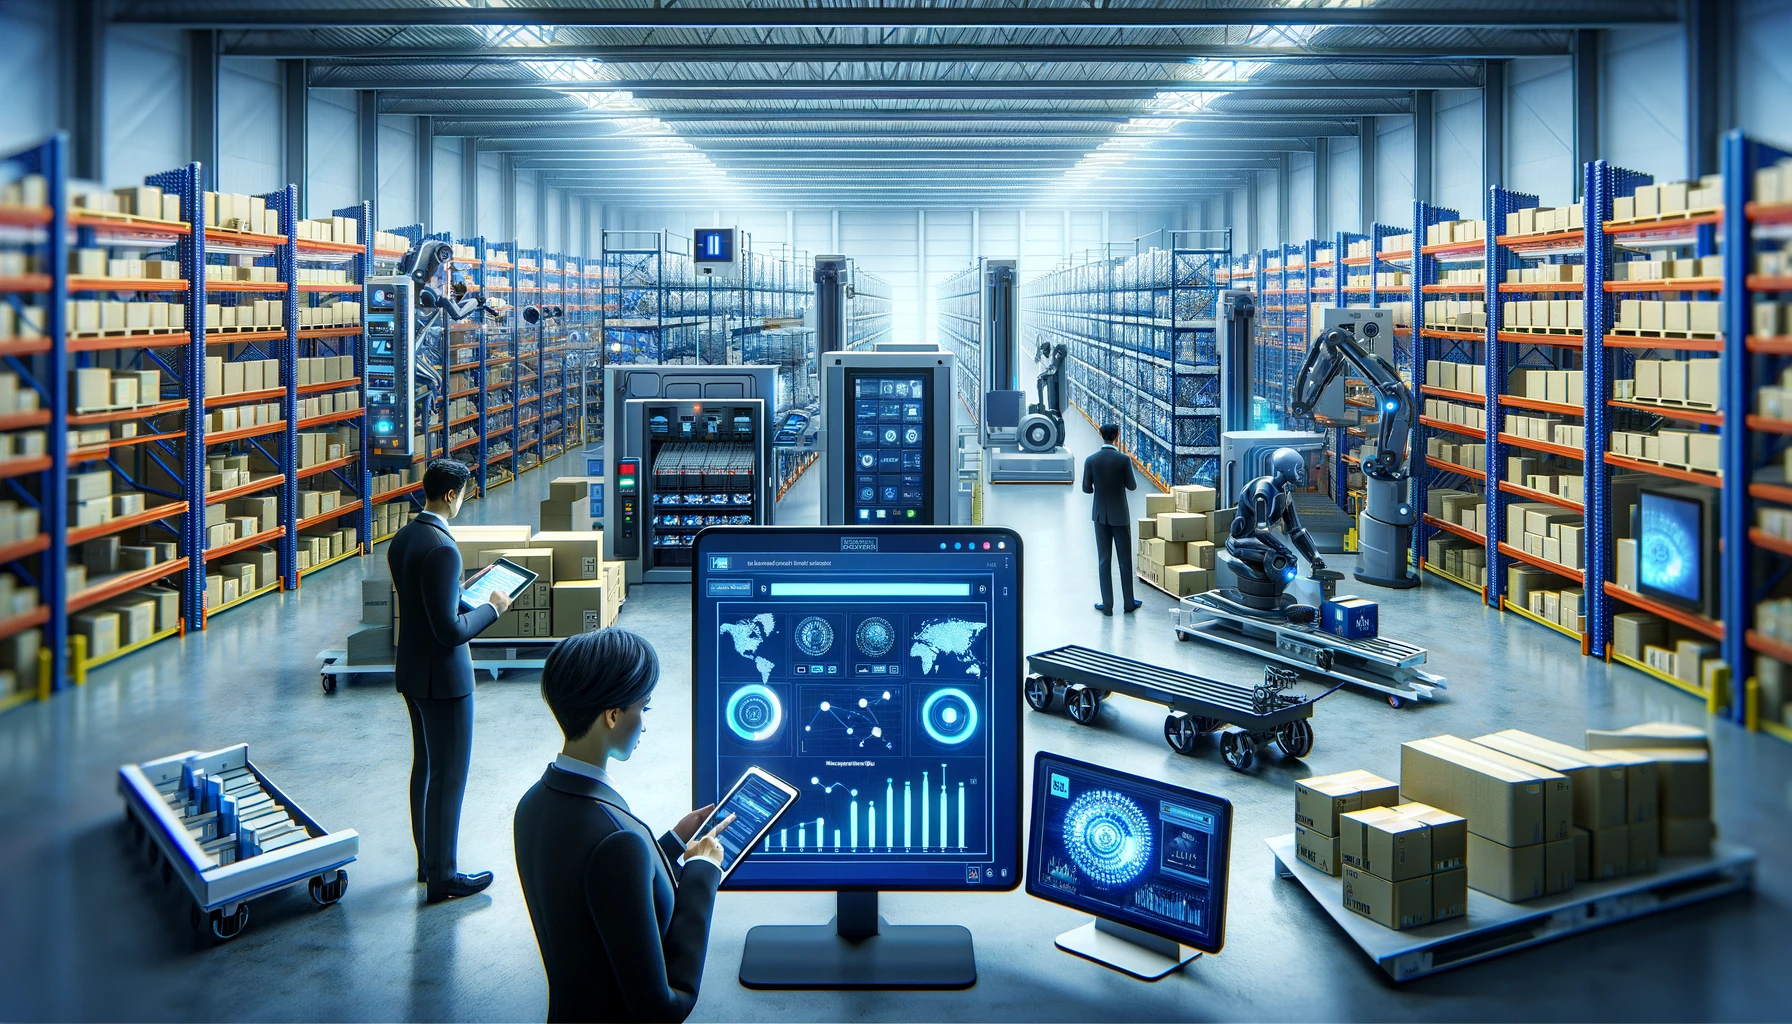 Here is the illustration for the article on how a company implemented an AI solution for inventory management across multiple locations. The scene captures three employees in a high-tech warehouse setting, interacting with the technology to optimize stock levels and meet customer demand efficiently.